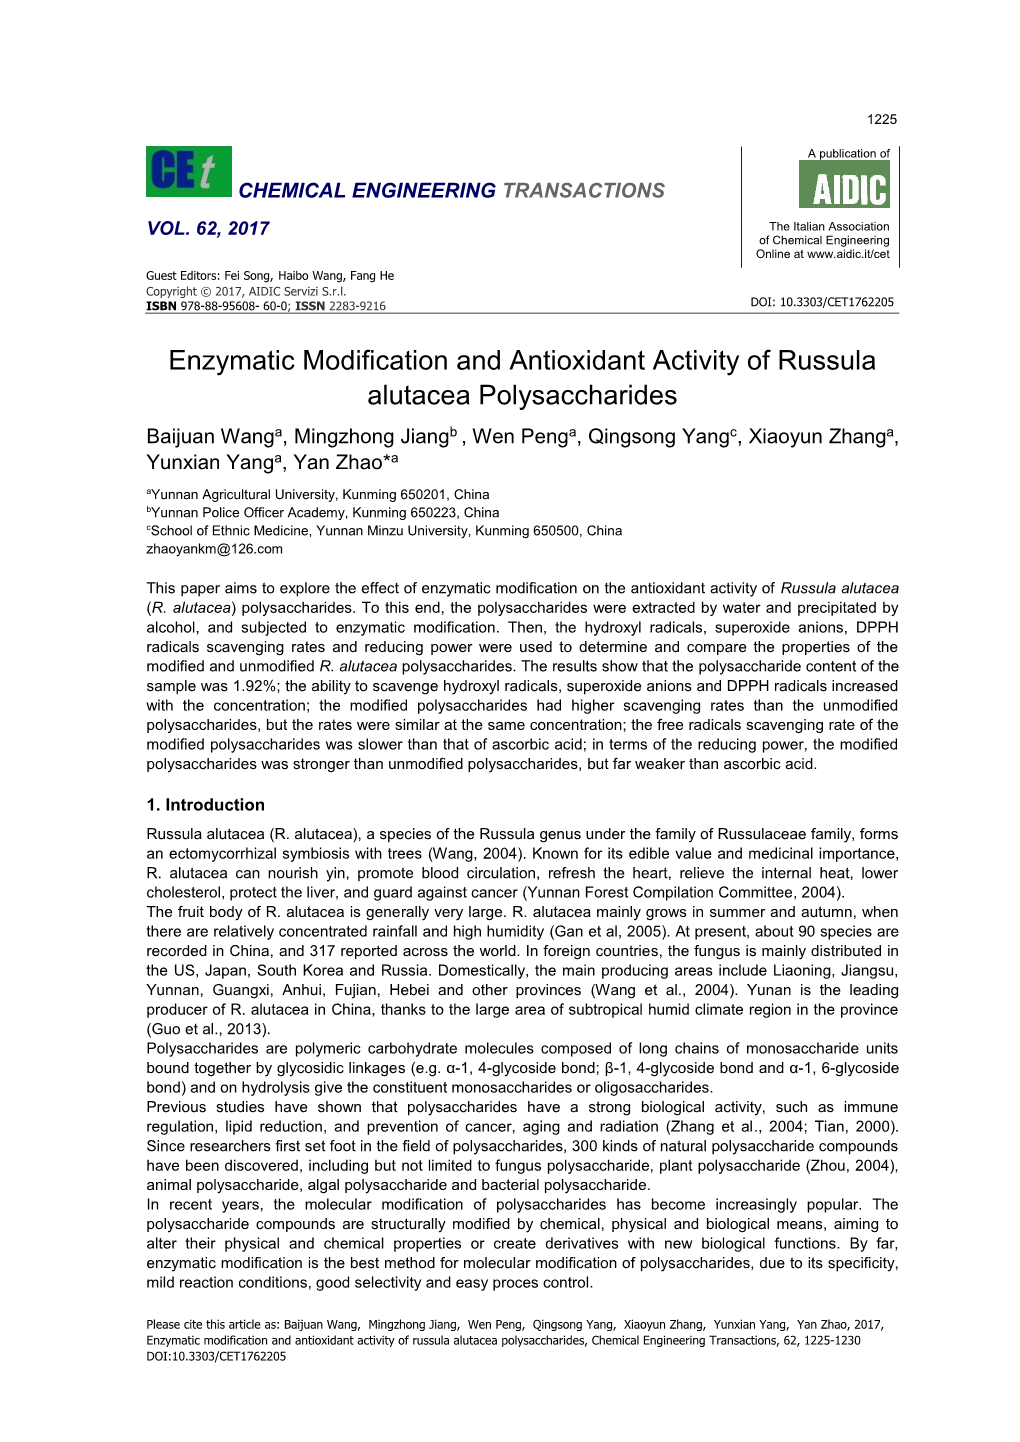 Enzymatic Modification and Antioxidant Activity of Russula Alutacea Polysaccharides